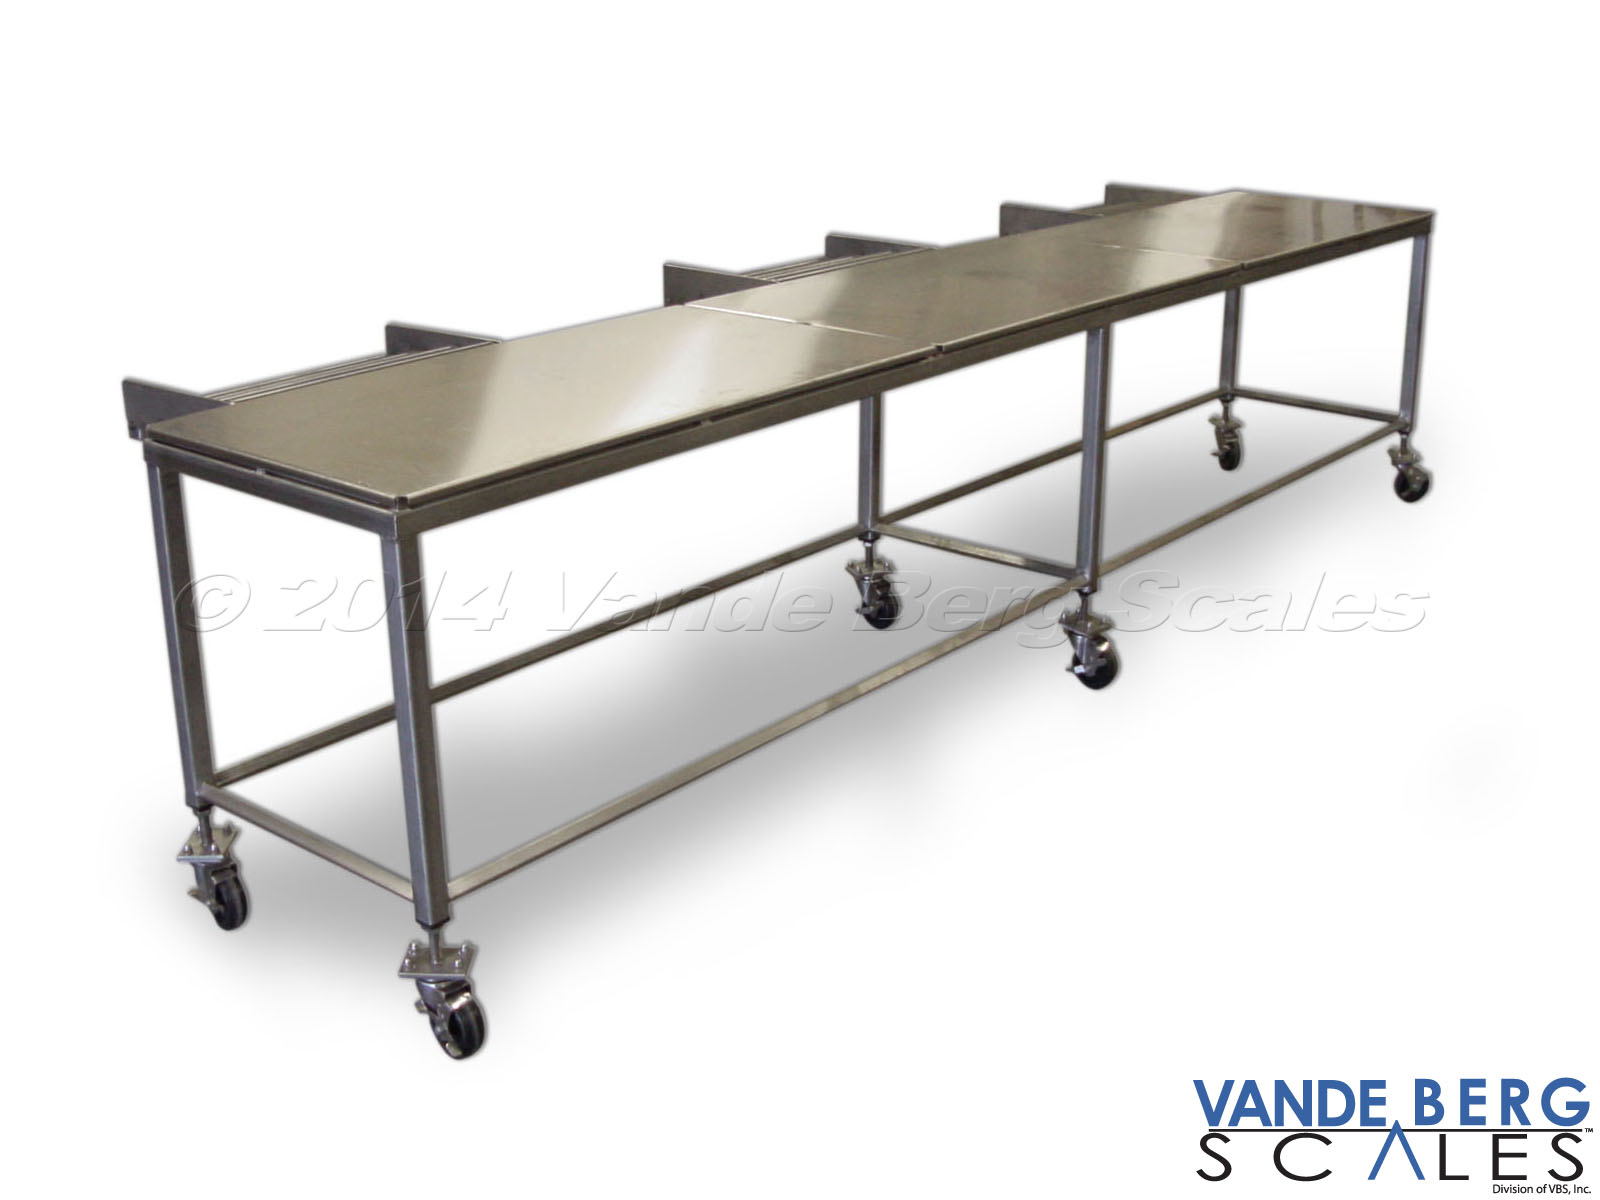 Heavy-duty stainless steel cart/table. Lockable casters permit quick change from stationary to mobile use.